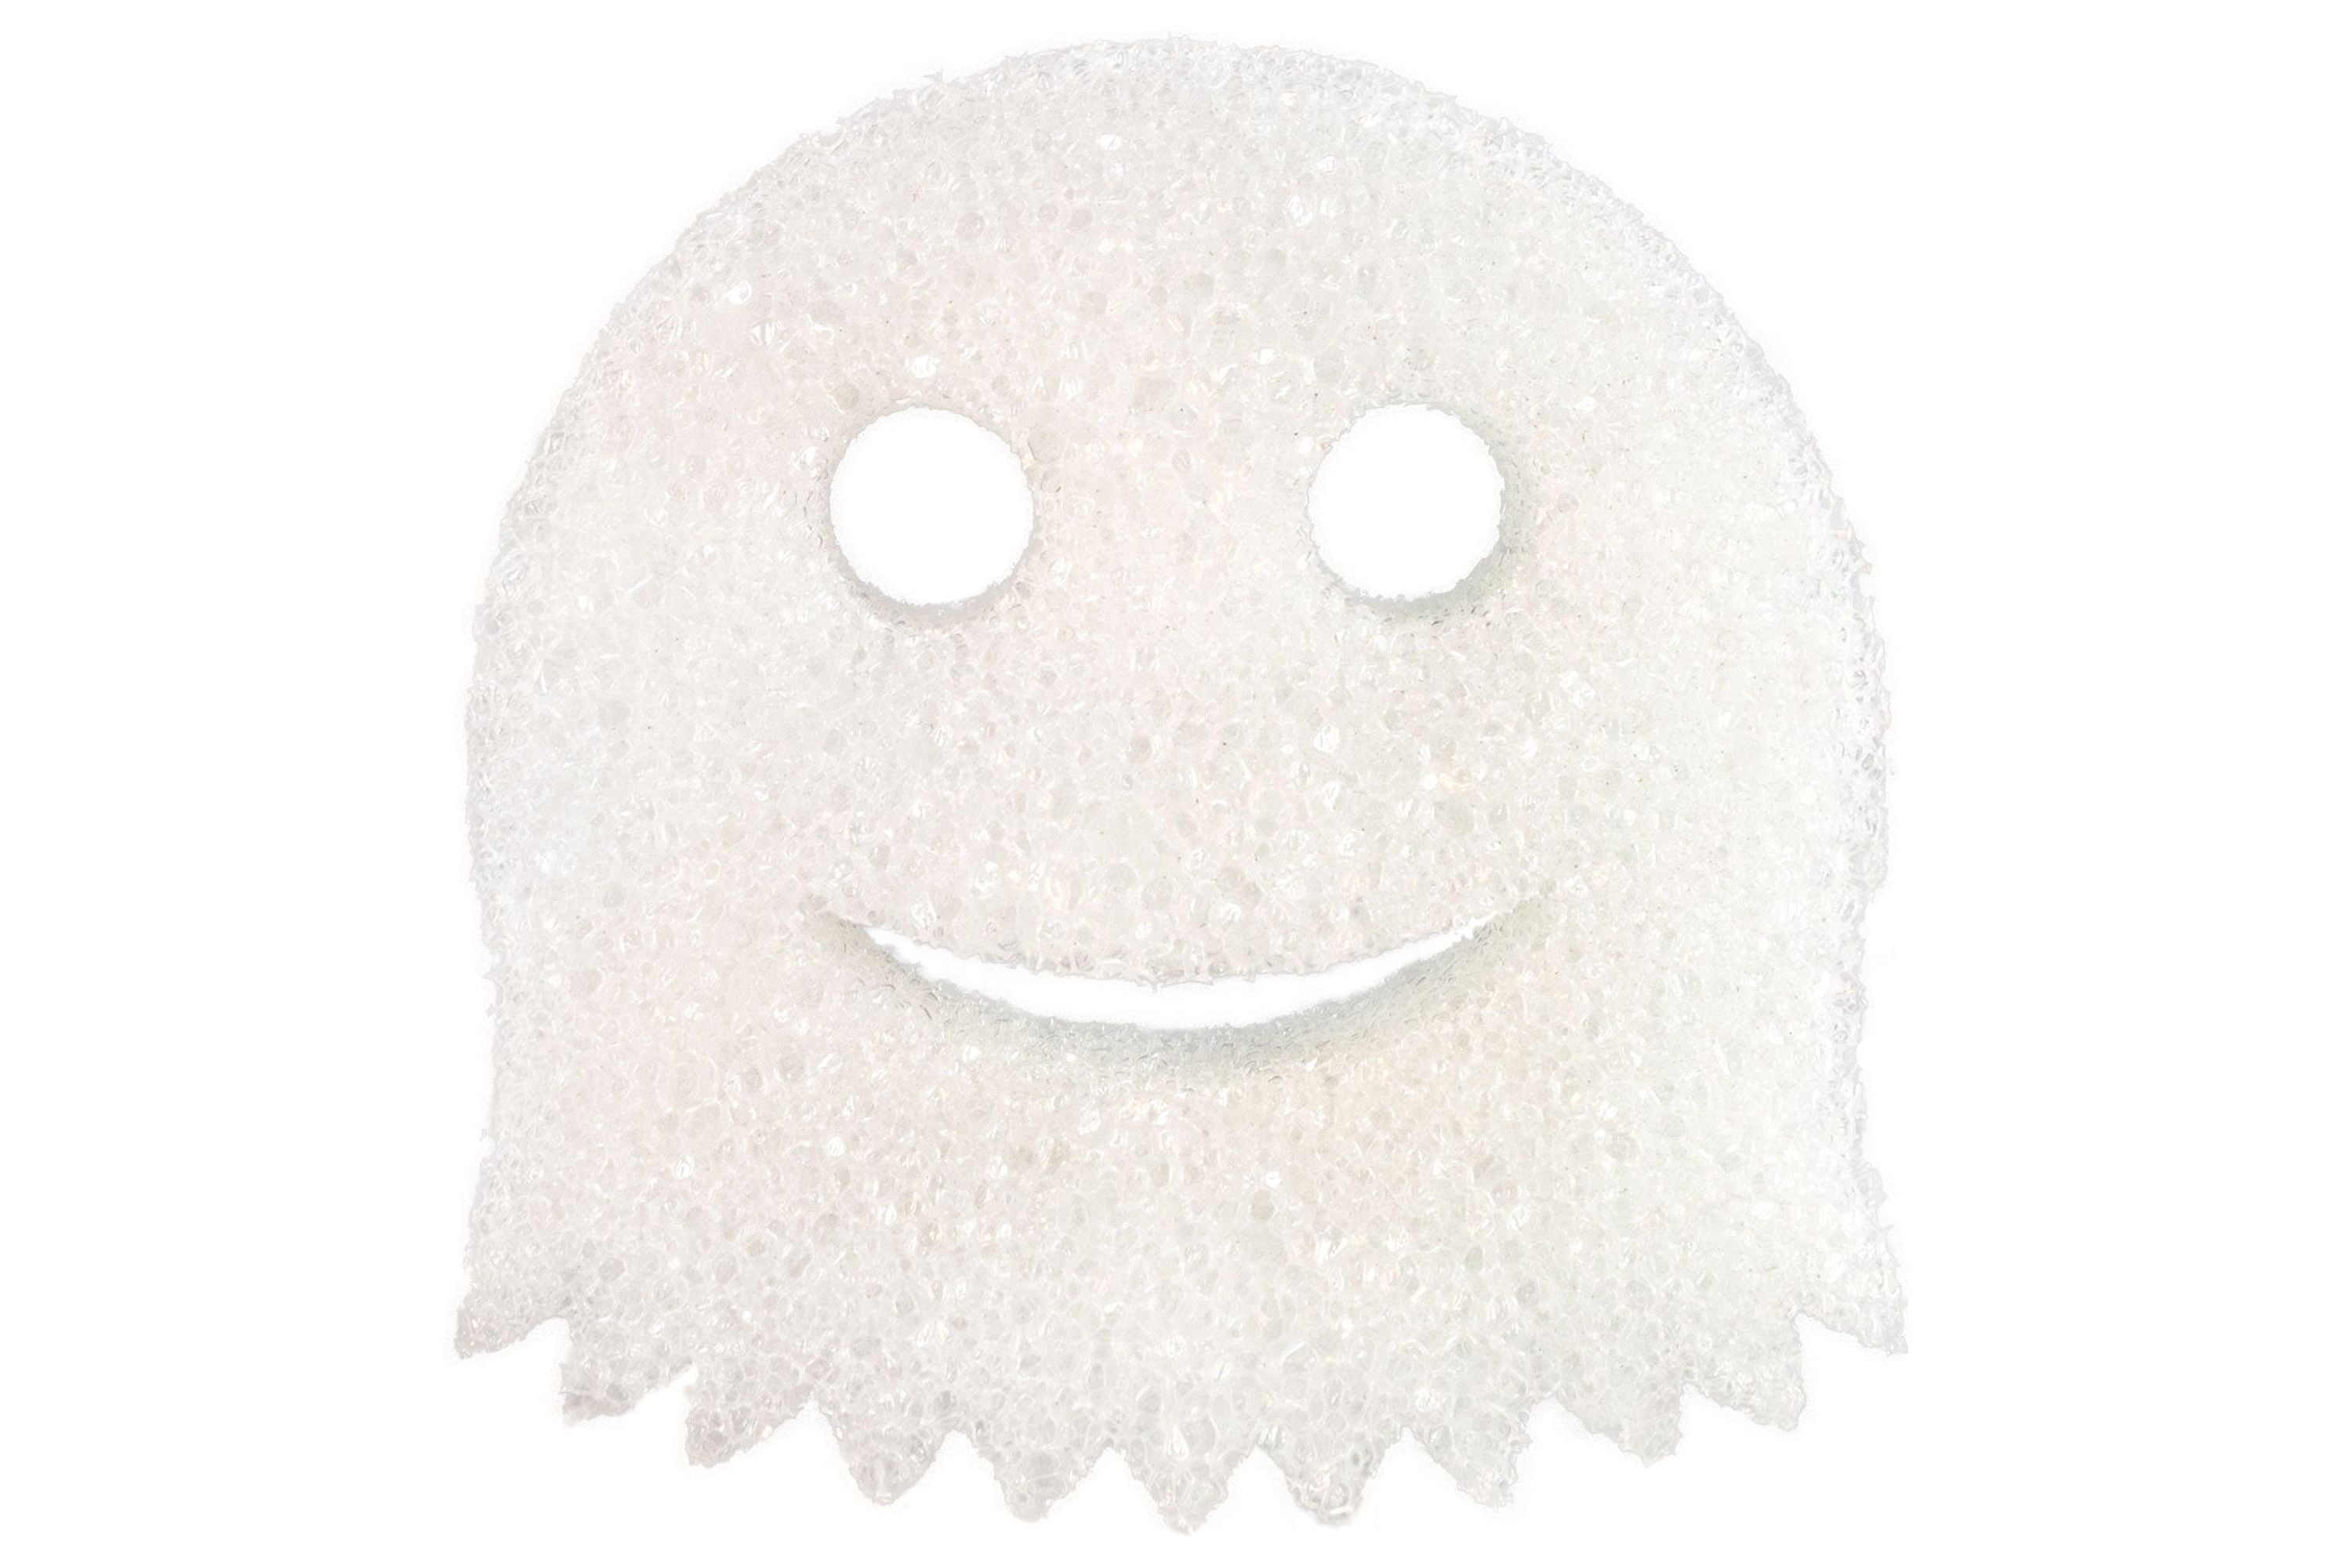 Scrub Daddy Halloween Sponges Are Here for Spooky Cleaning